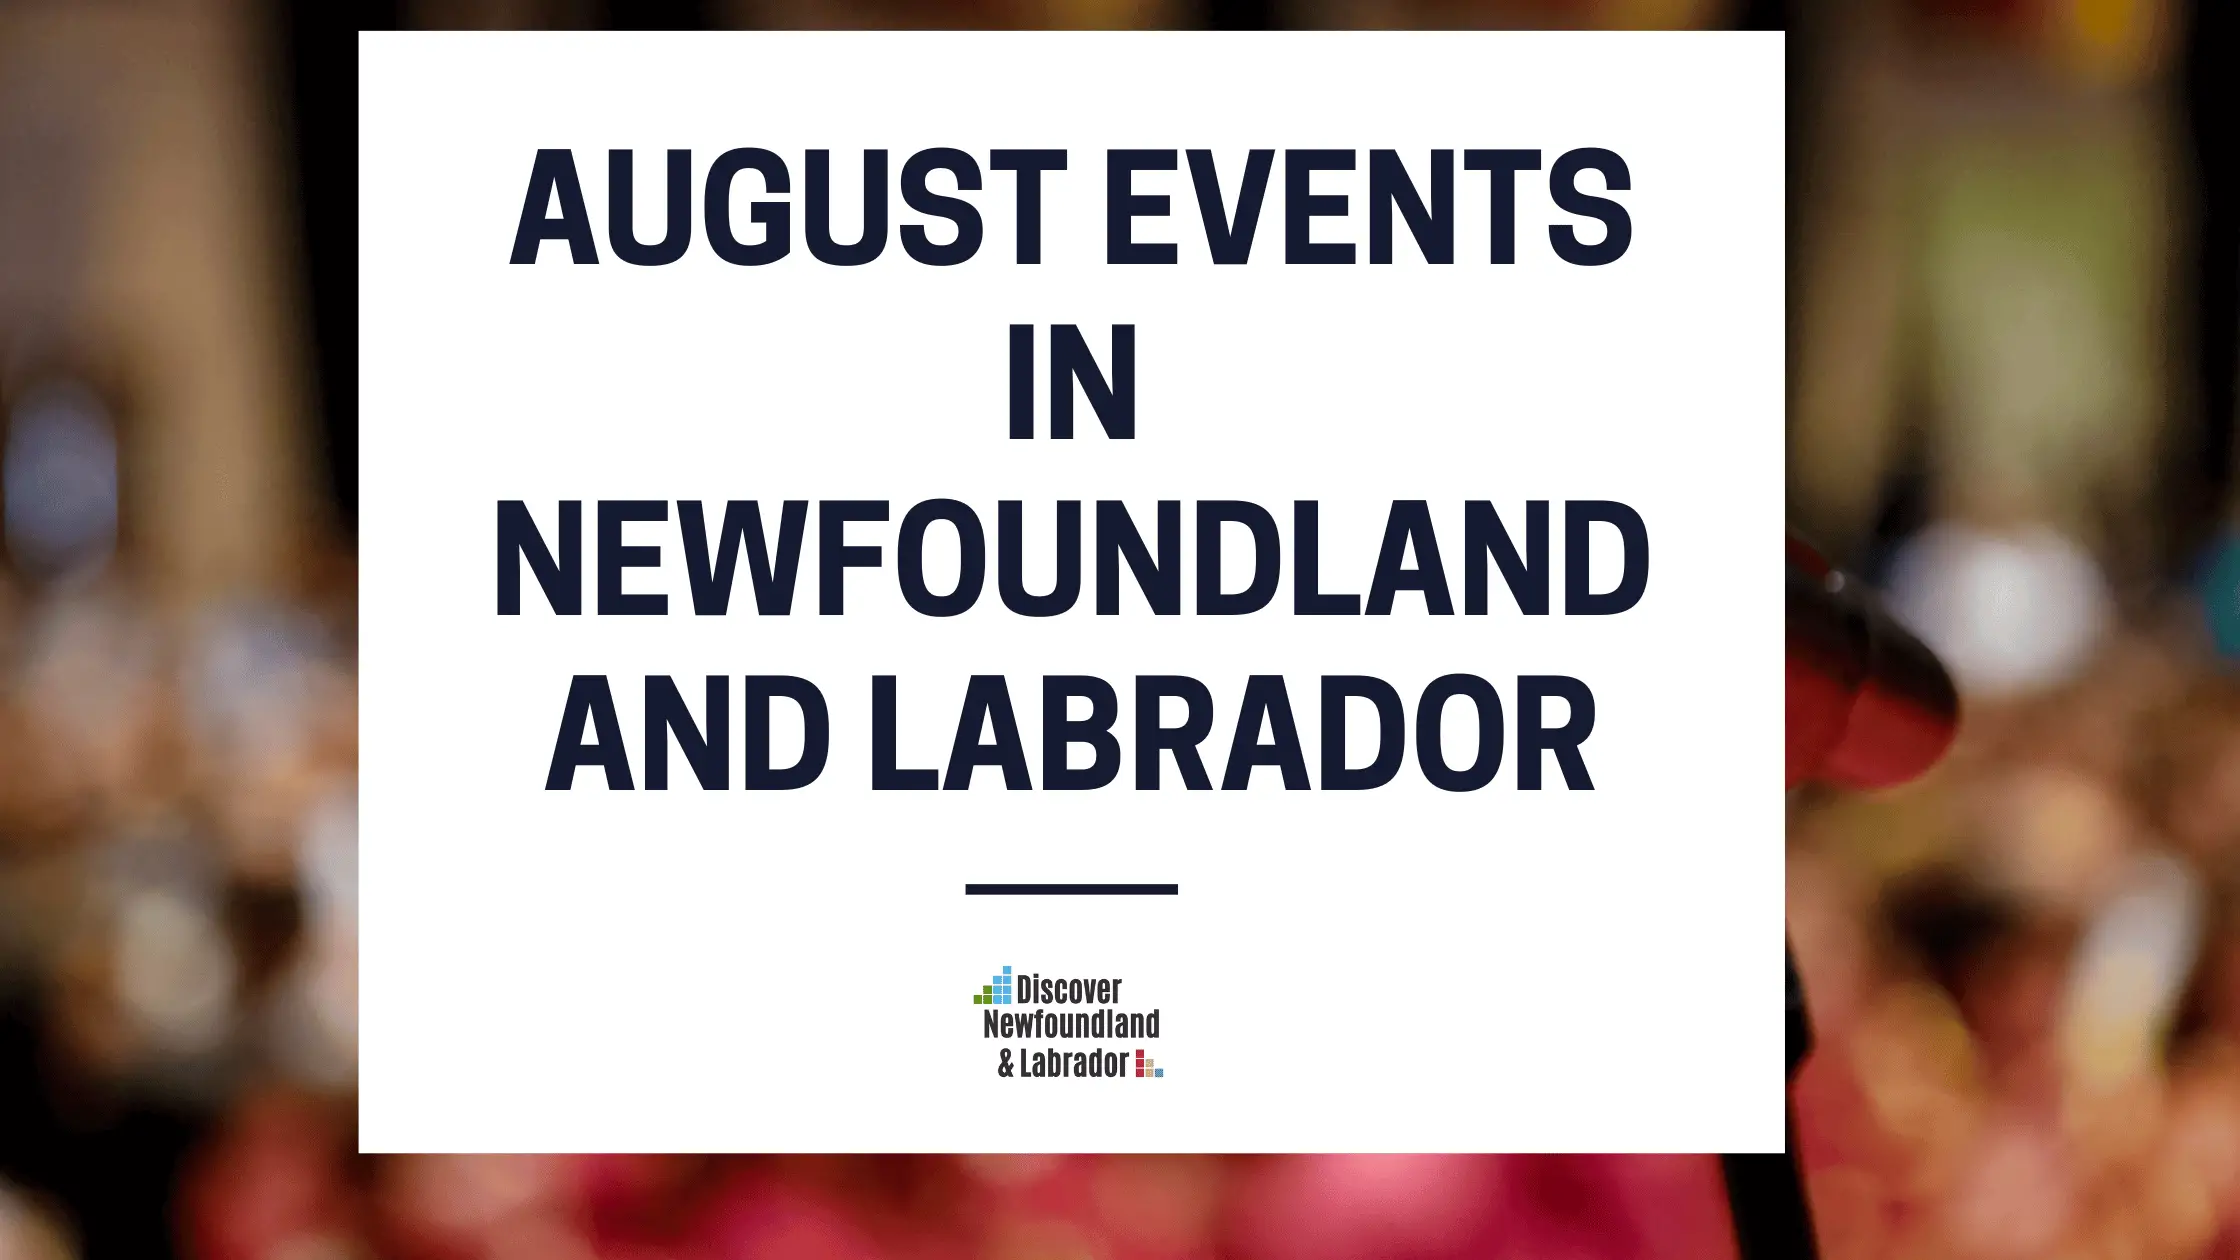 August Events In Newfoundland and Labrador